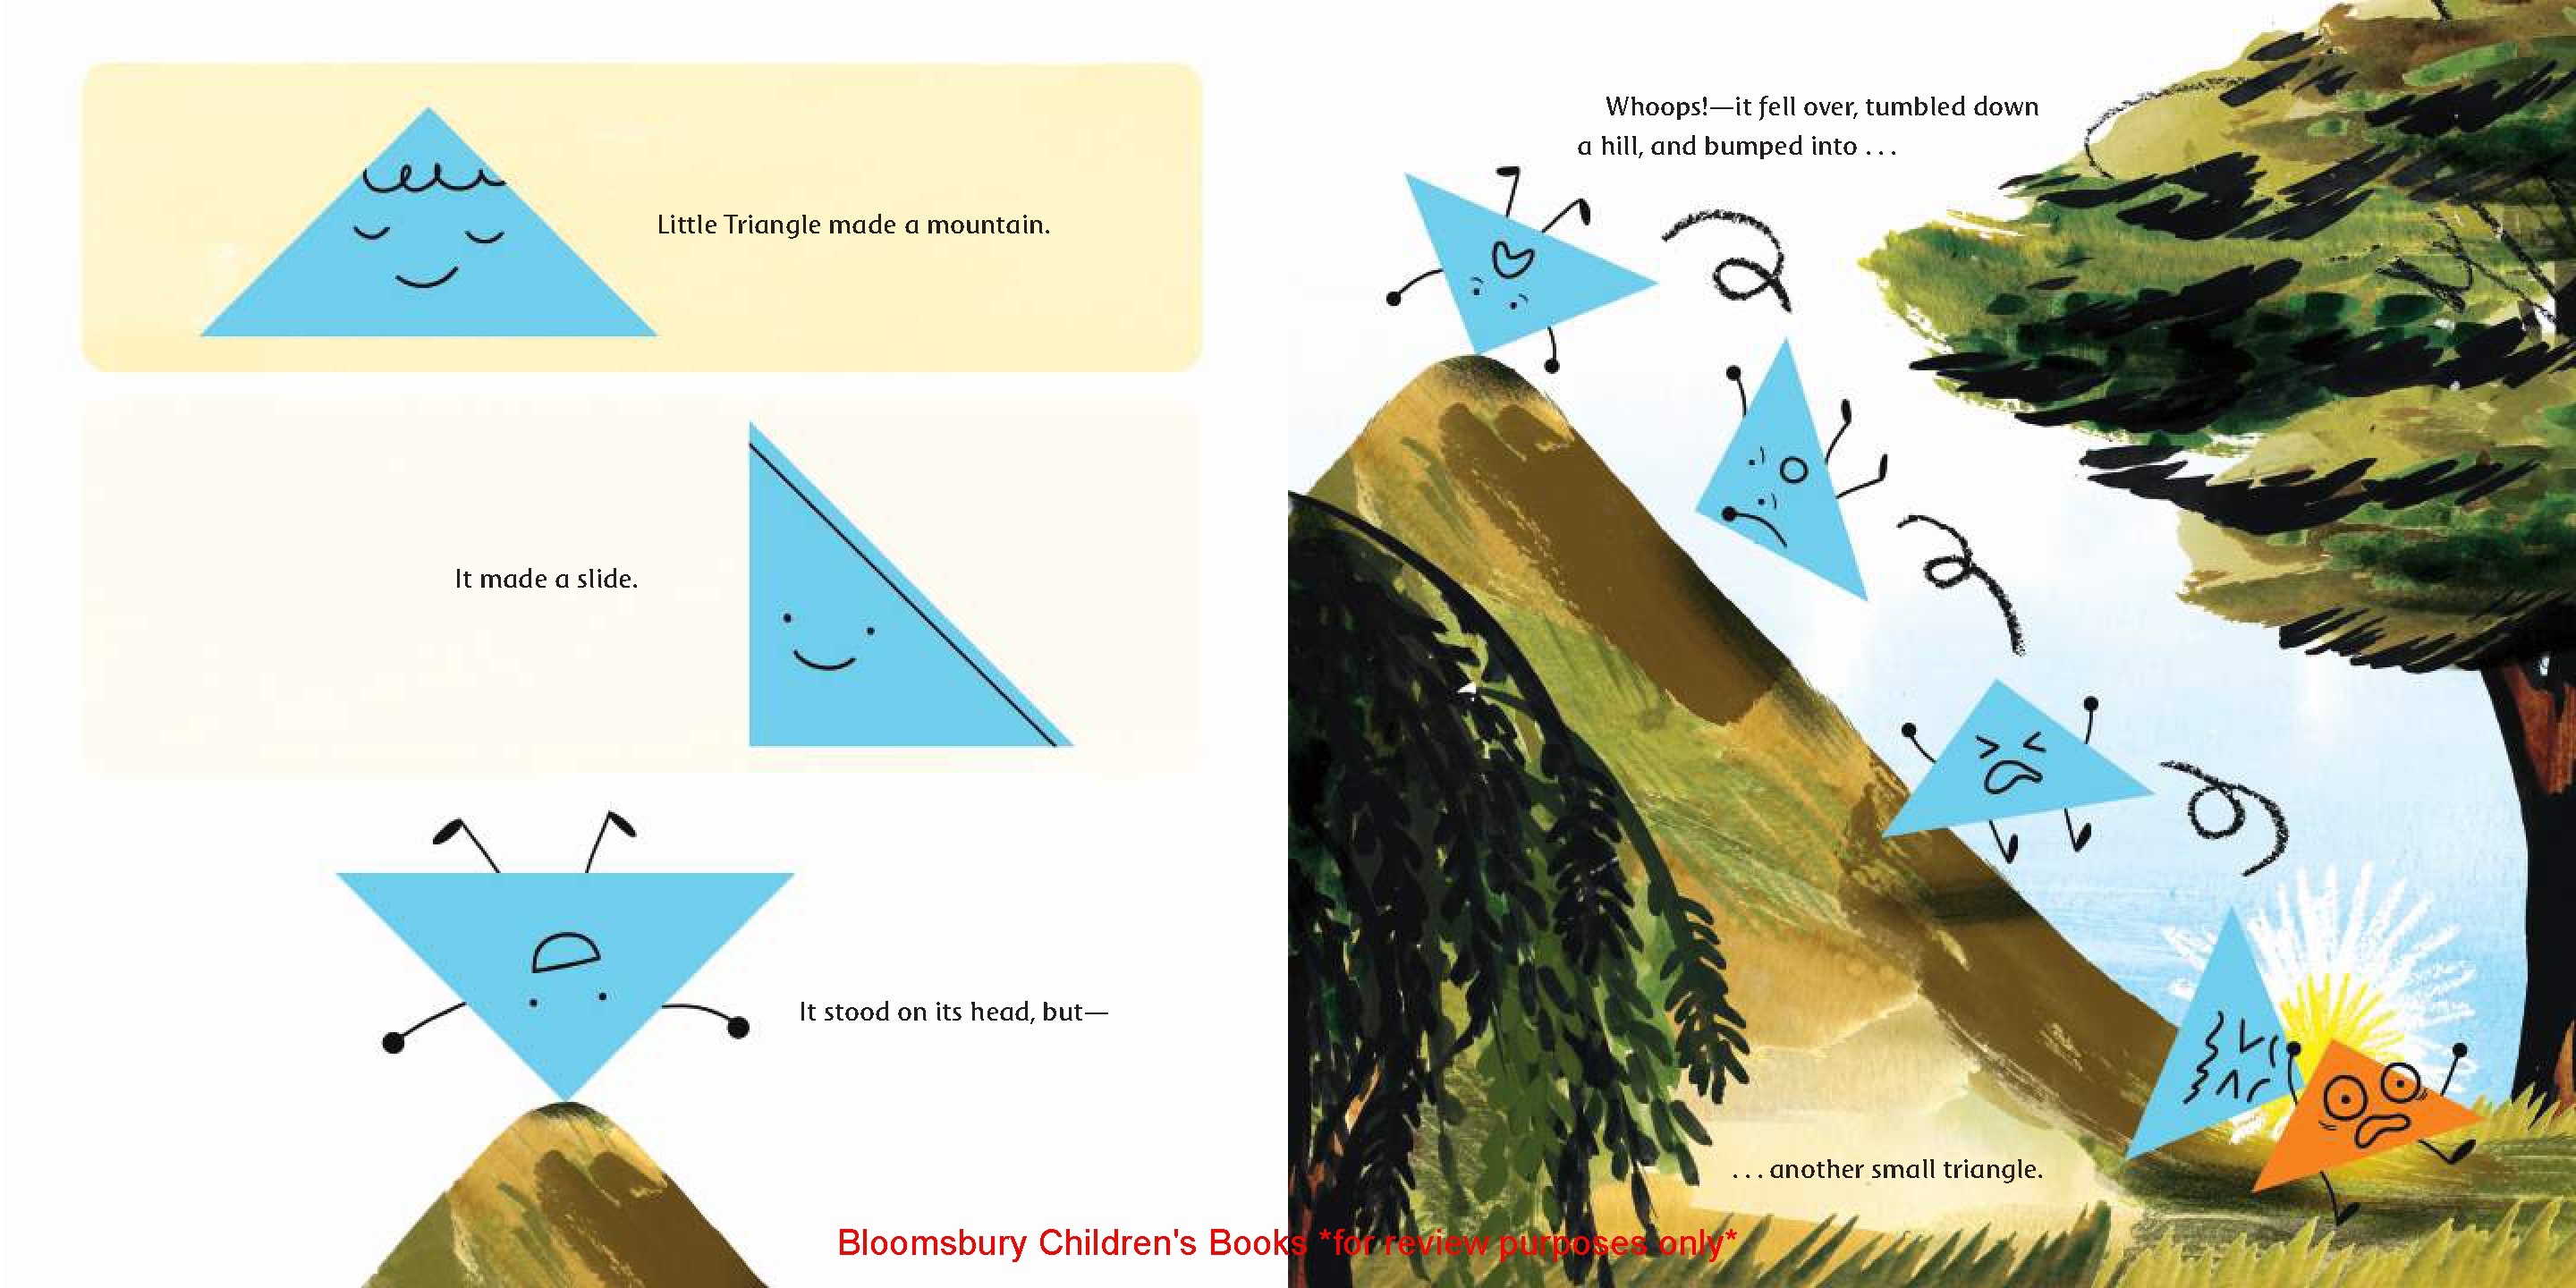 The Quest for a Tangram Dragon